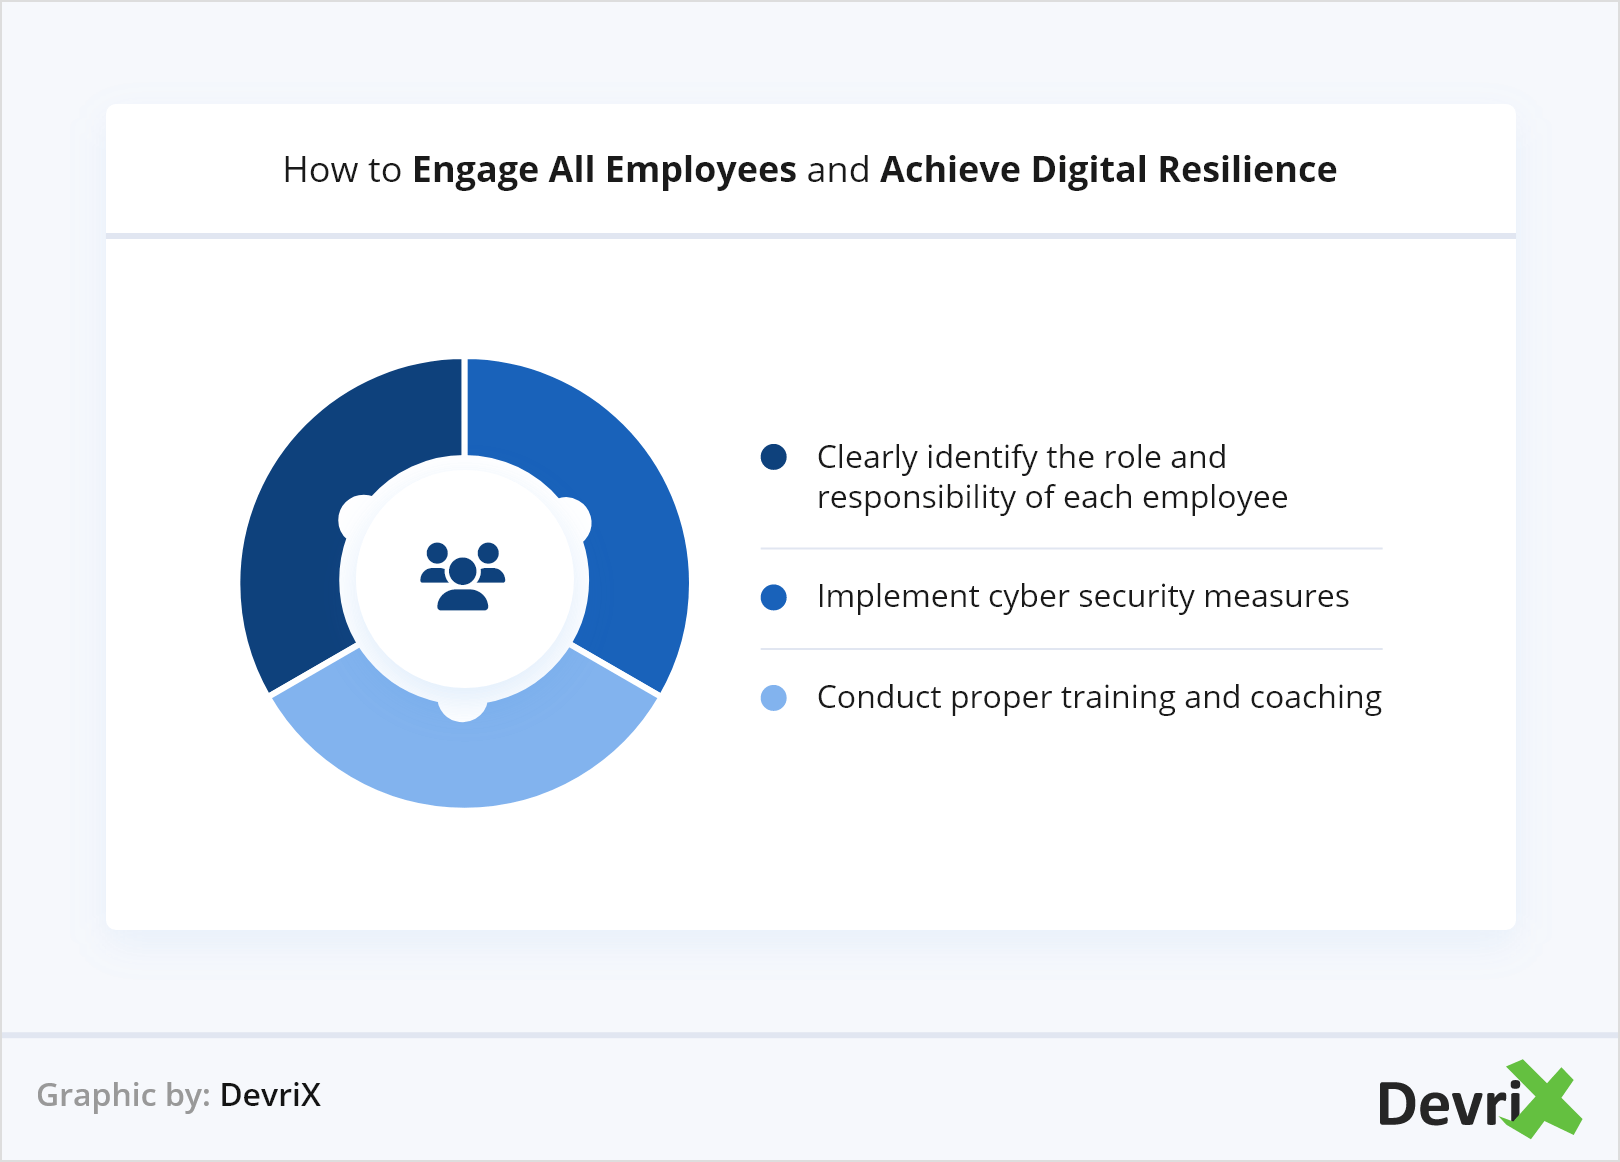 How to Engage All Employees and Achieve Digital Resilience